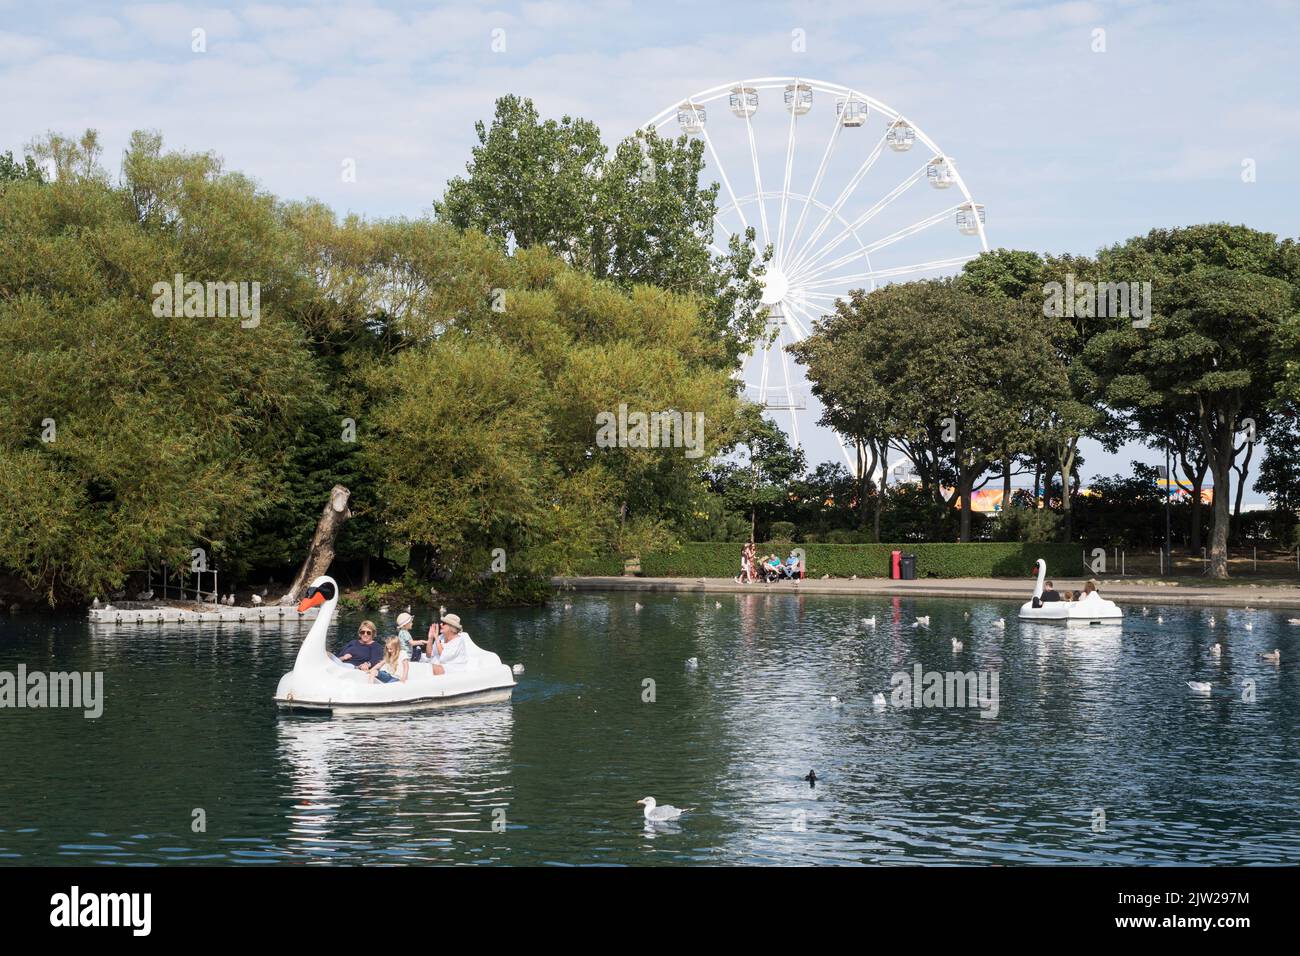 Family in a swan pedalo on South Shields South Marine Park lake, with Ferris wheel in the background, England, UK Stock Photo